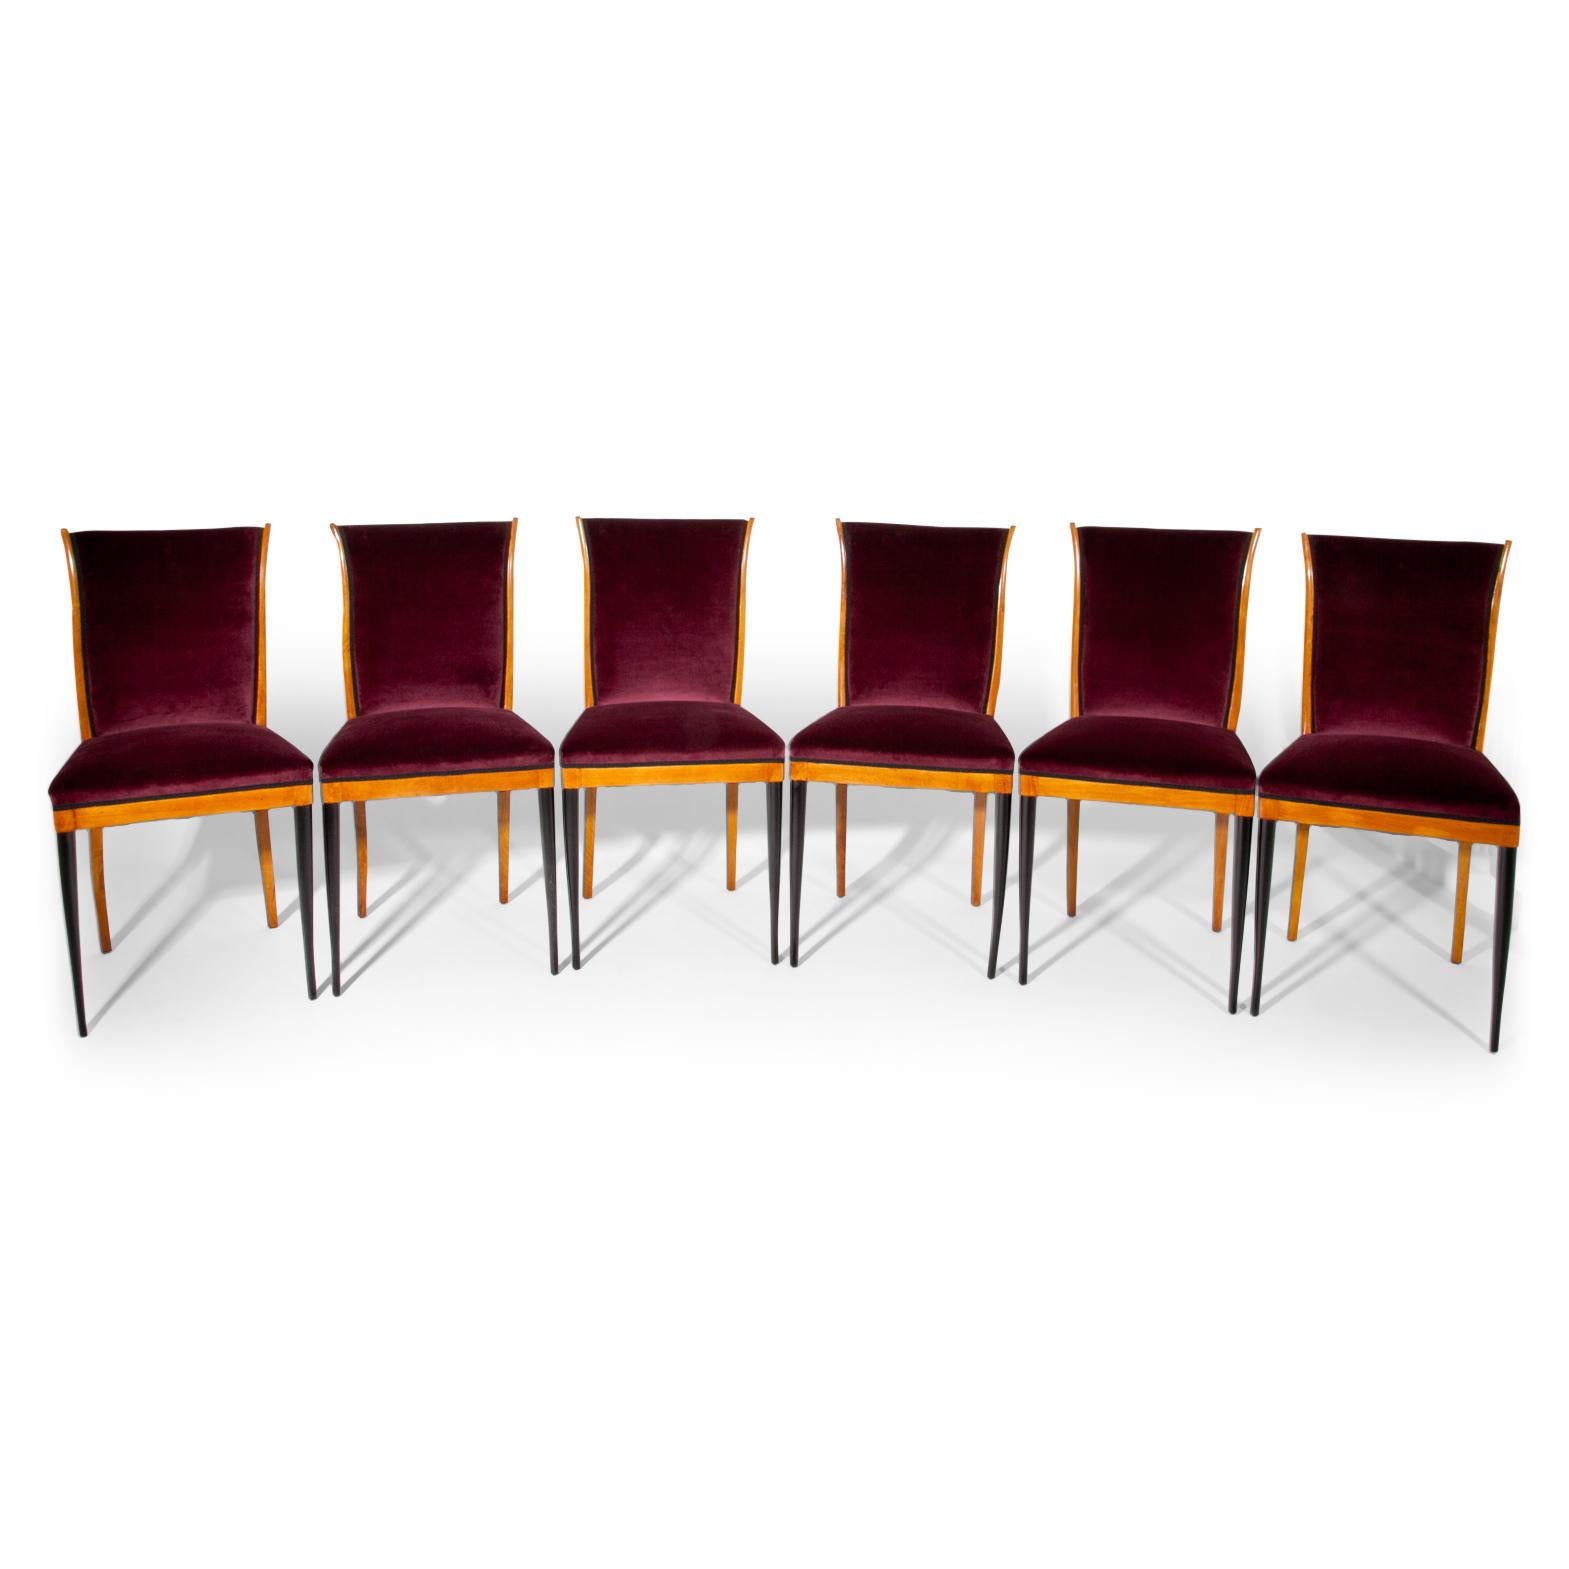 Mid-Century Modern Dining Chairs, Italy, Mid-20th Century